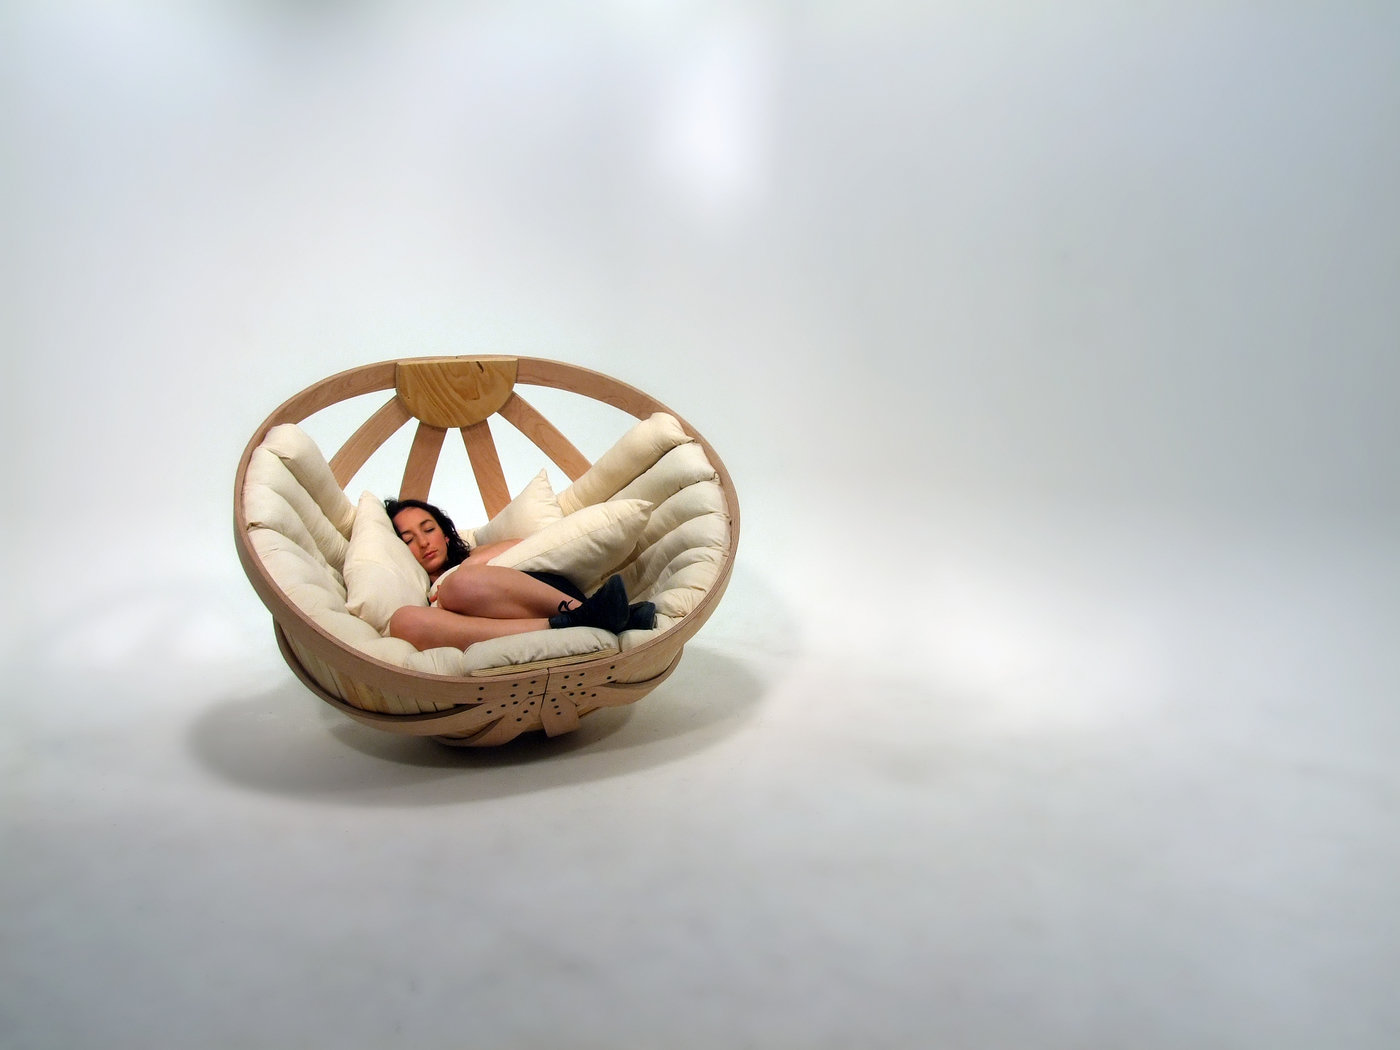 Cradle Chair occupied by a person